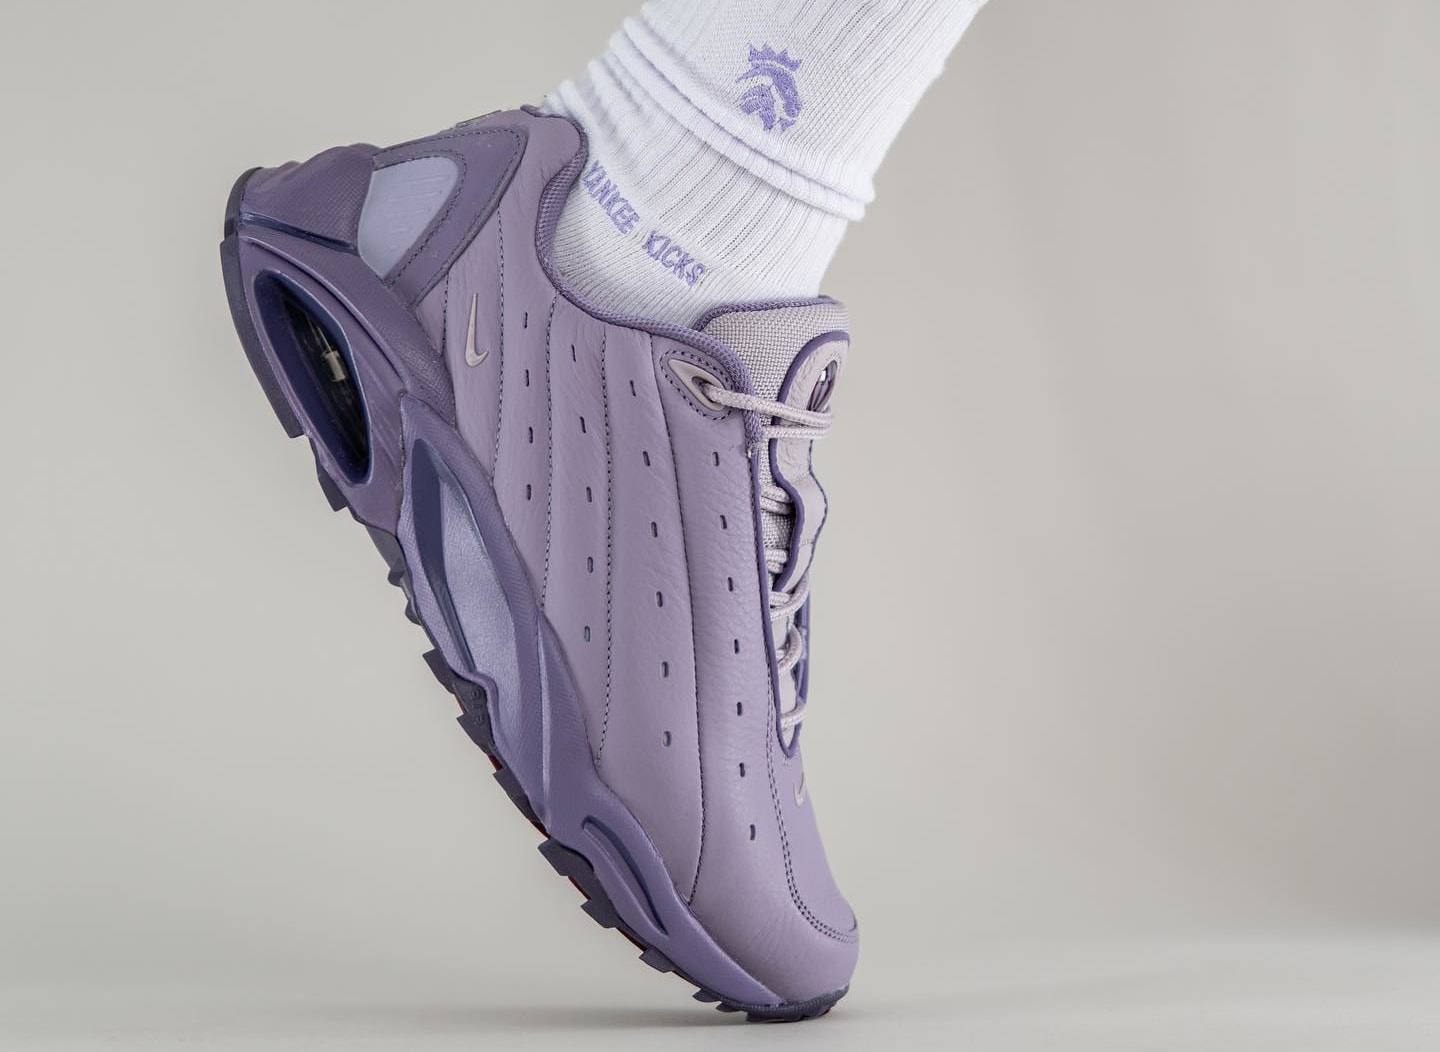 Nocta x Nike Hot Step 'Purple' DH4692-500 Lateral